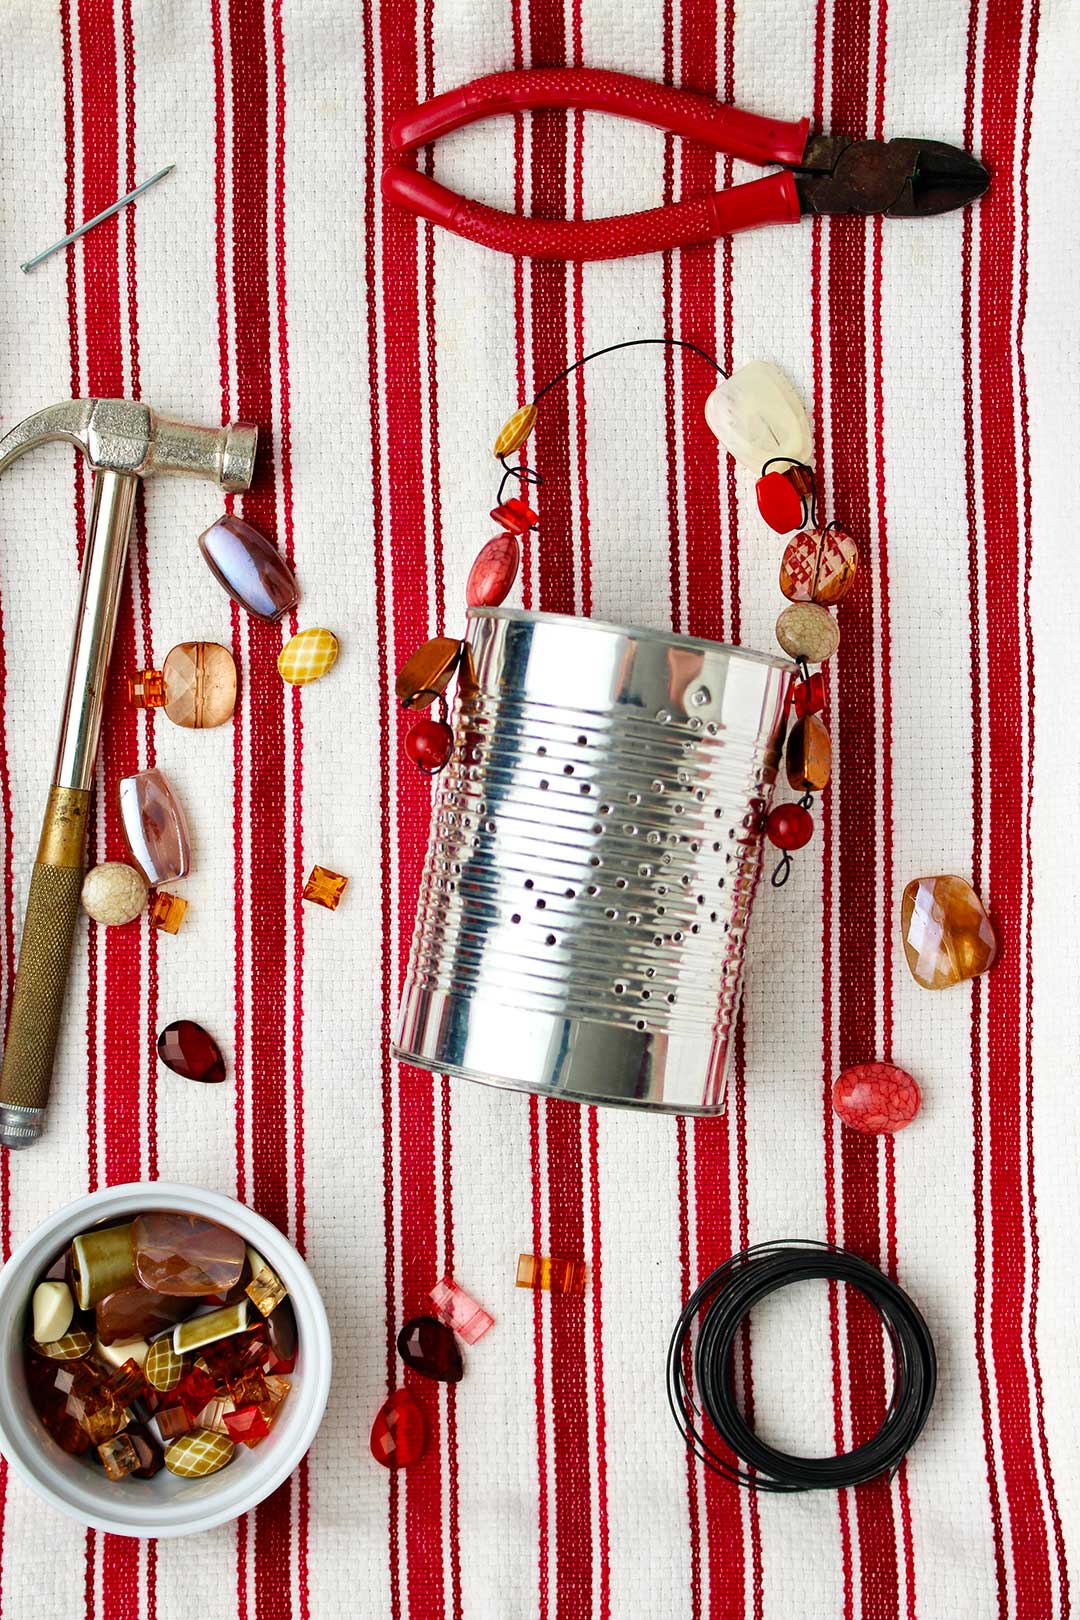 Completed Punched Tin Can Lantern resting on red and white striped linen with beads and supplies.